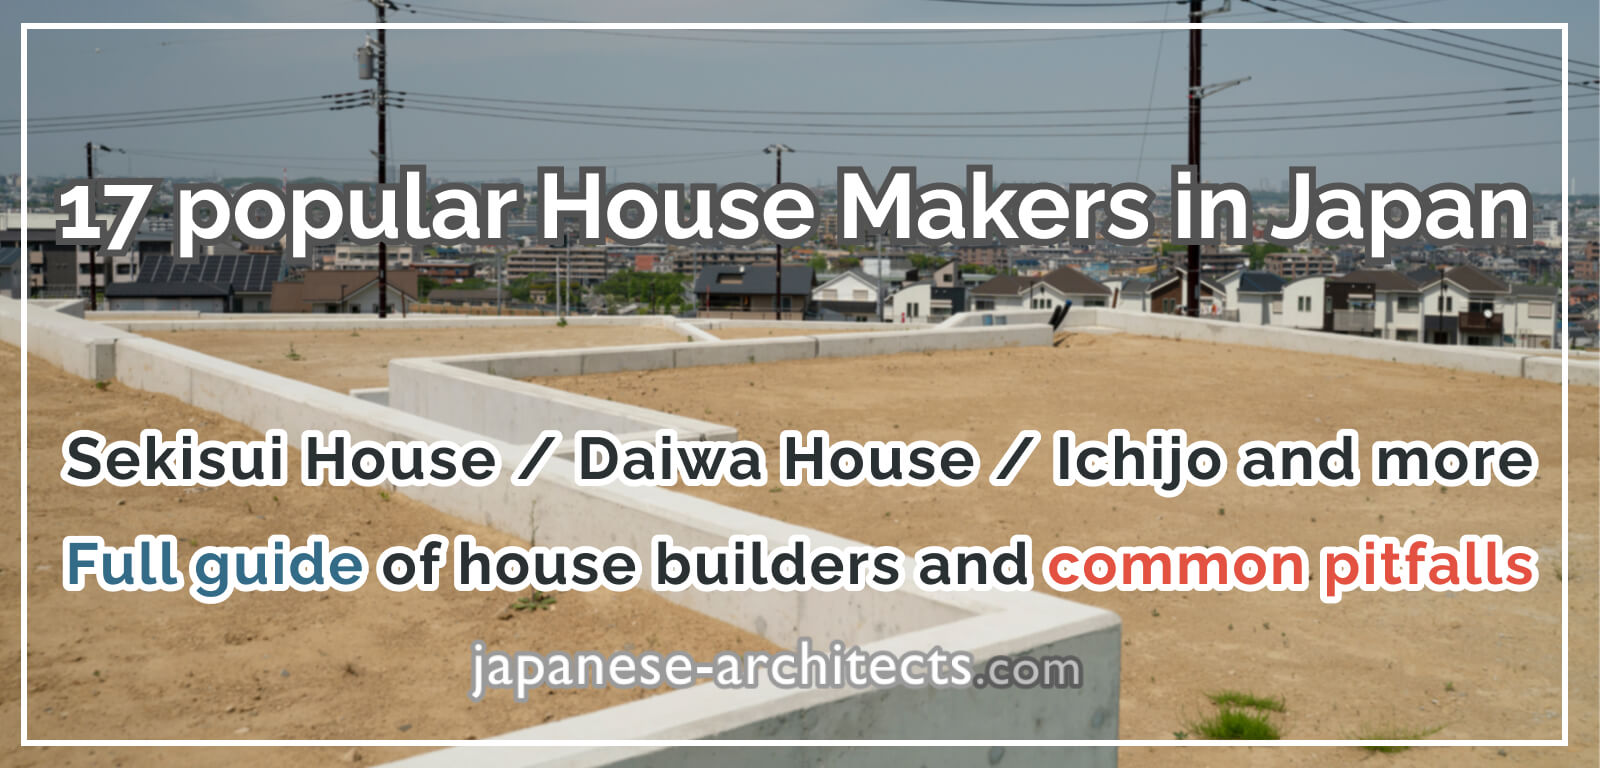 Full guide of house building in Japan and 5 common pitfalls